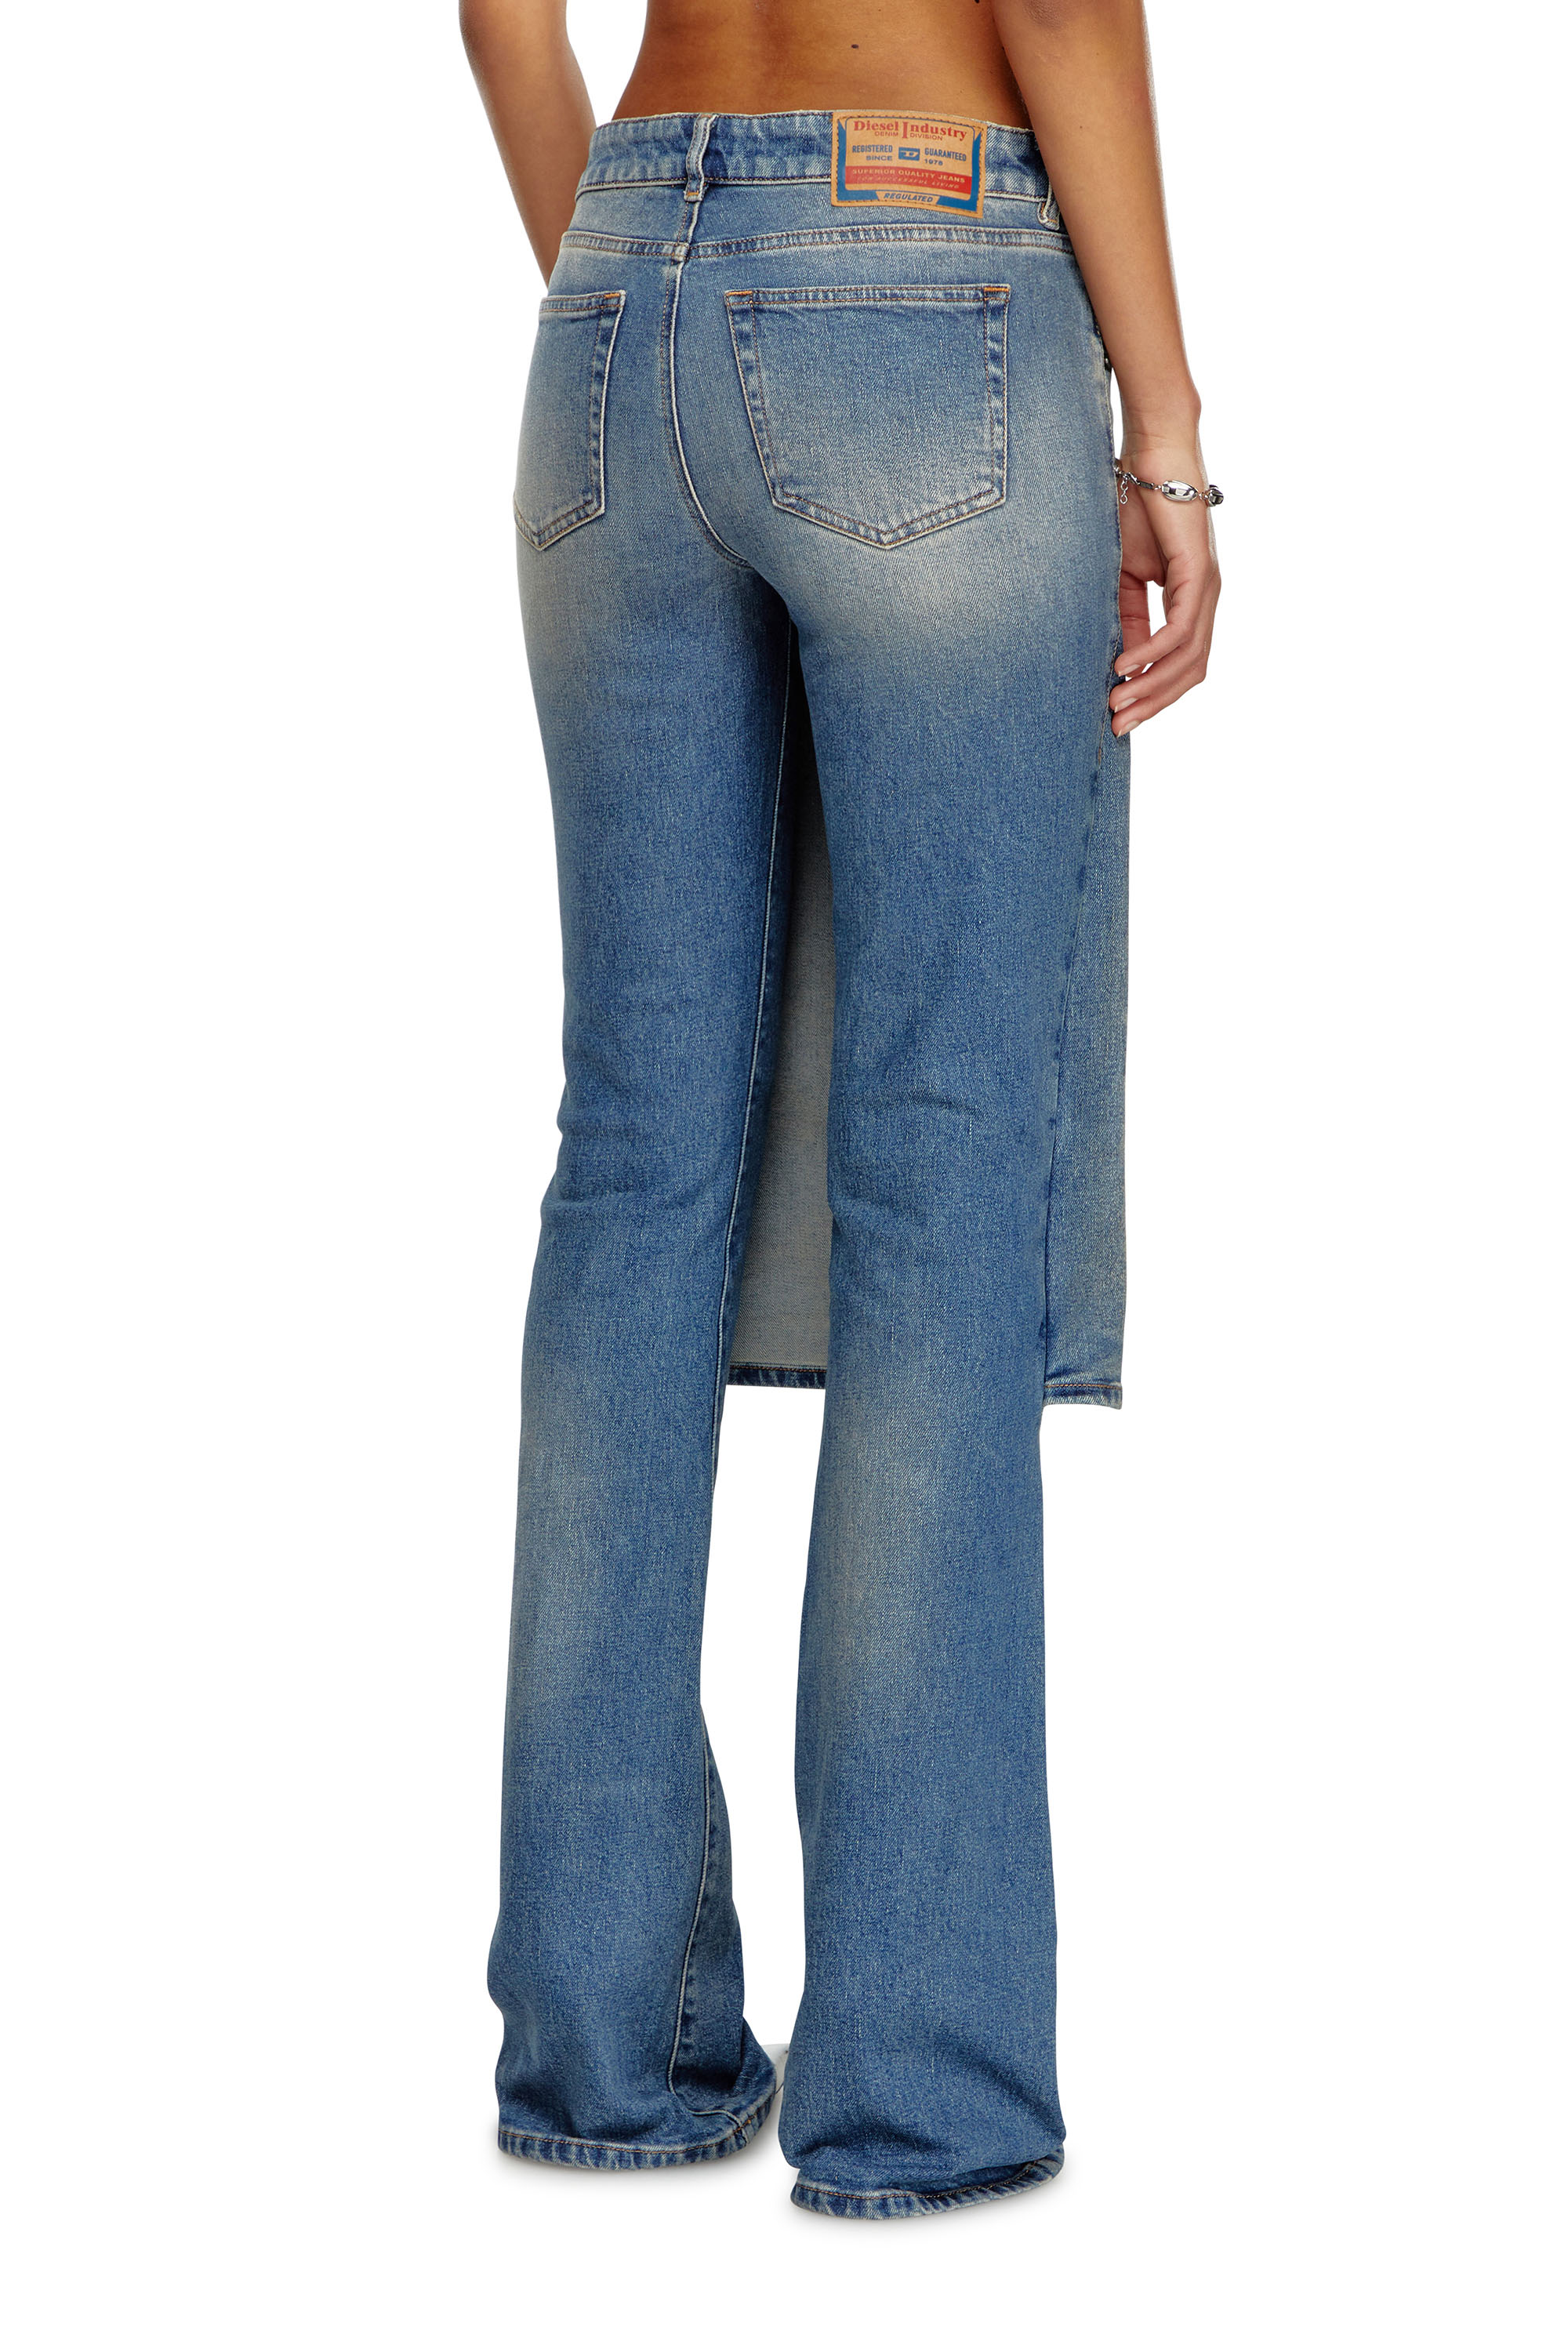 Diesel - Bootcut and Flare Jeans D-Sel 007X8, Mujer Bootcut y Flare Jeans - D-Sel in Azul marino - Image 3